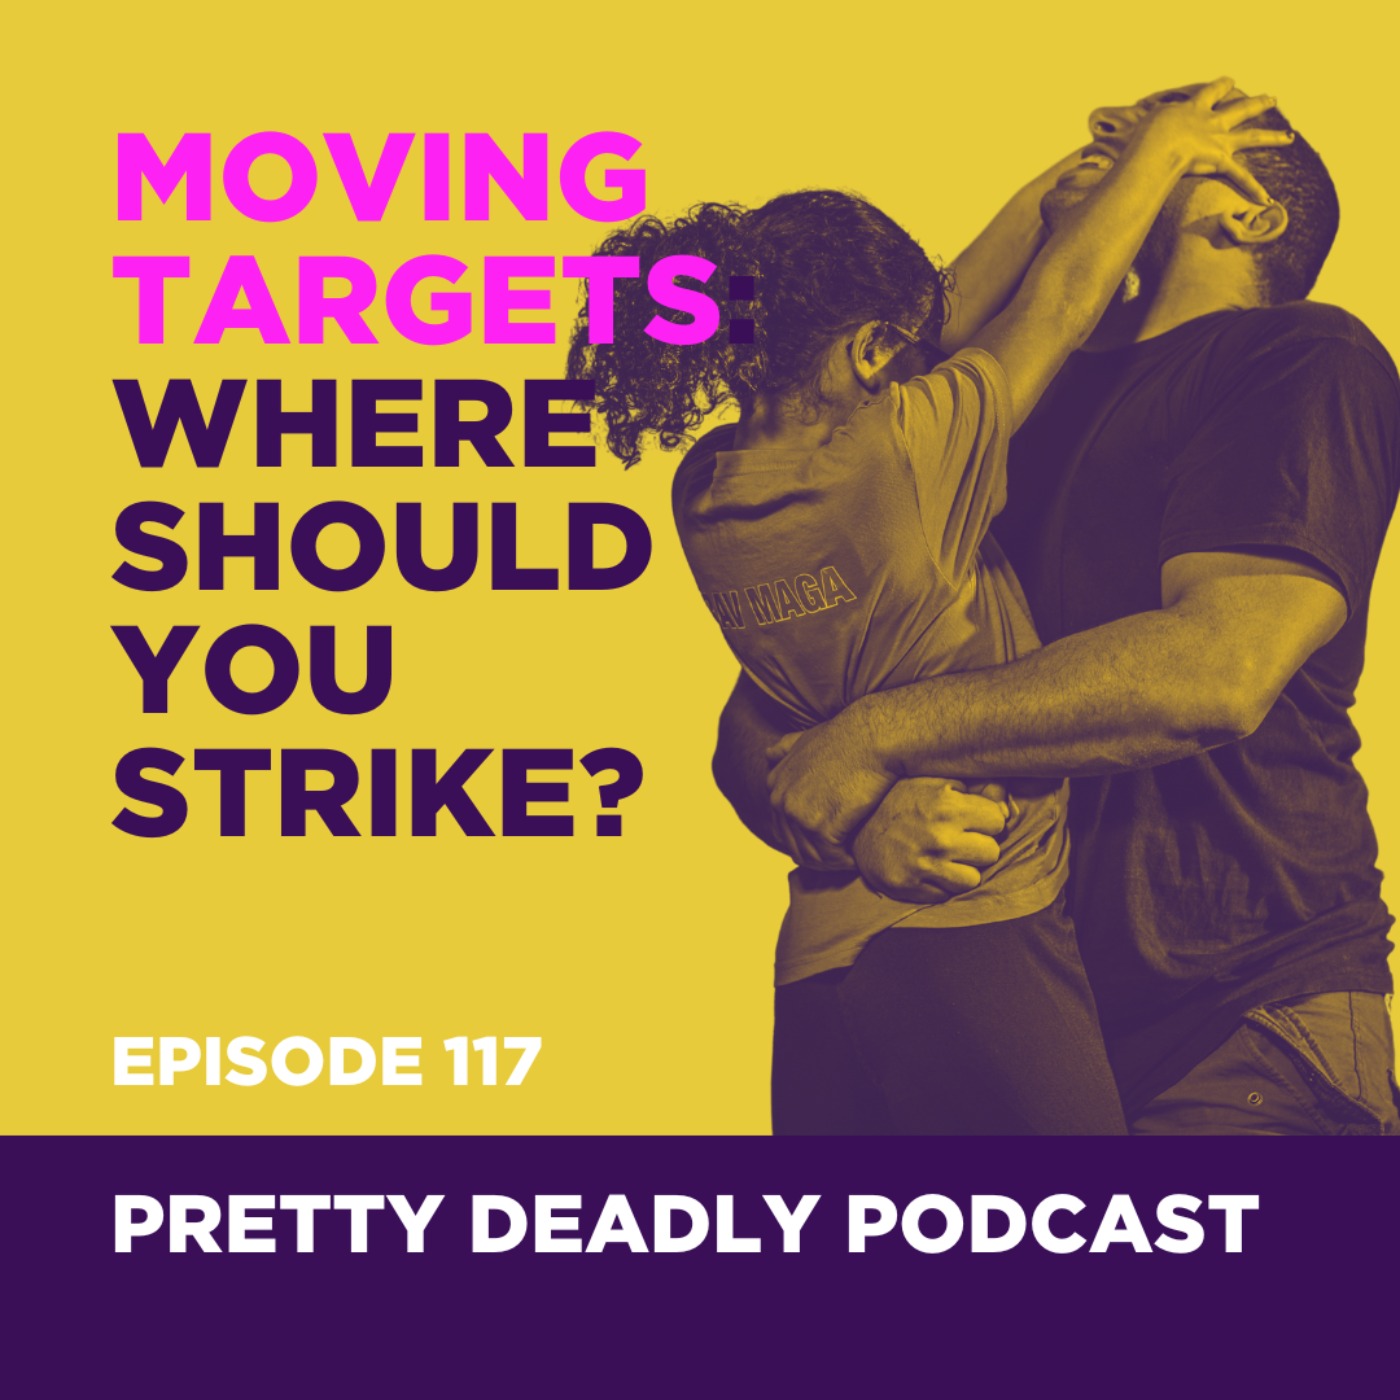 S7 Episode 117: Moving Targets | Pretty Deadly Podcast